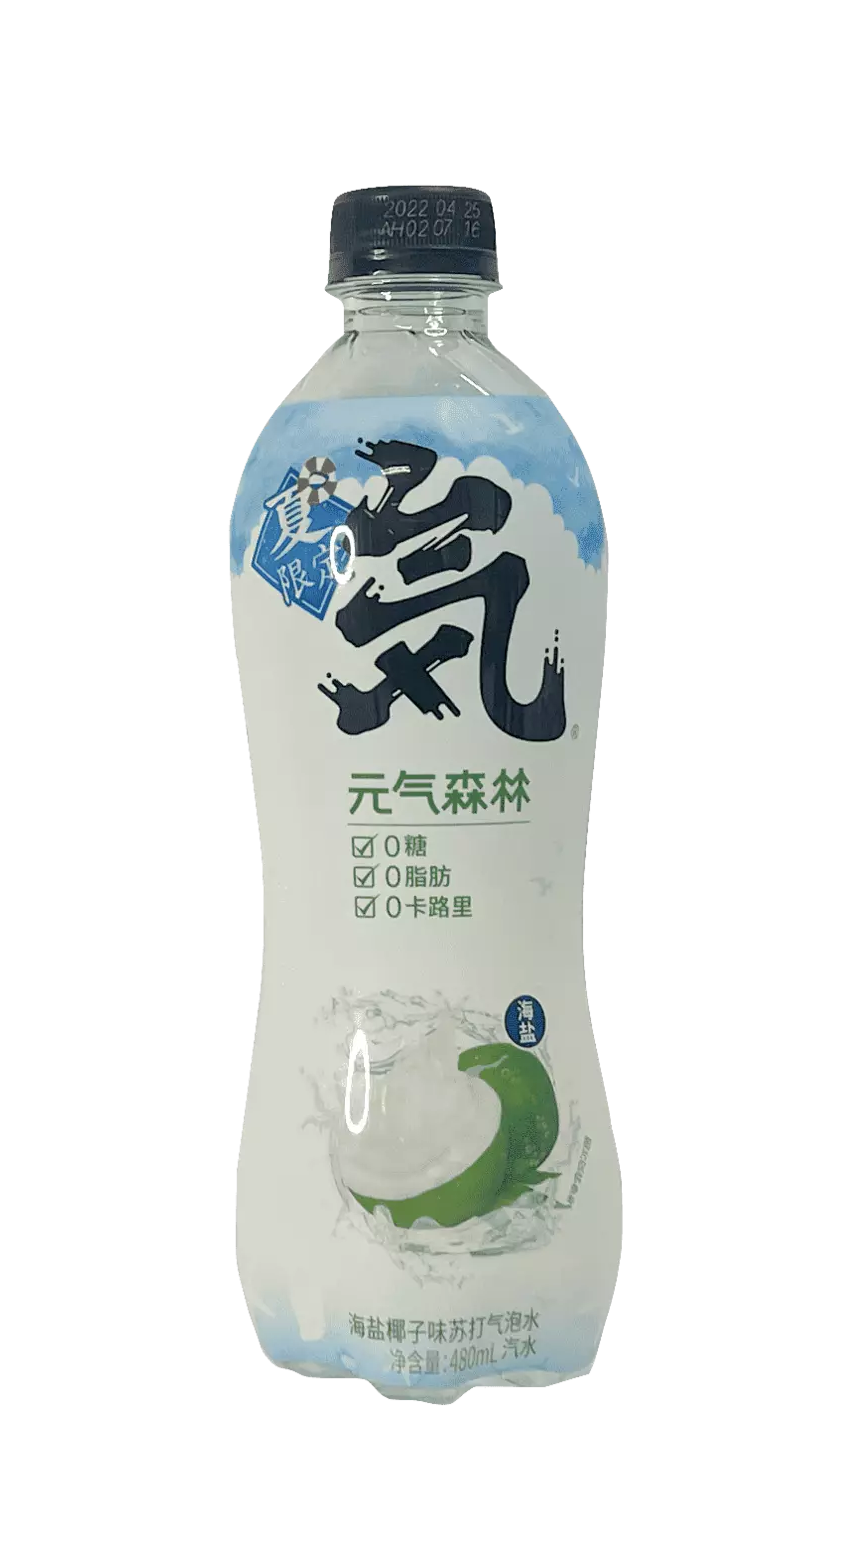 Carbonated Water With Coconut/Sea Salt Flavor 480ml/Bottle Yuan Qi Sen Lin China